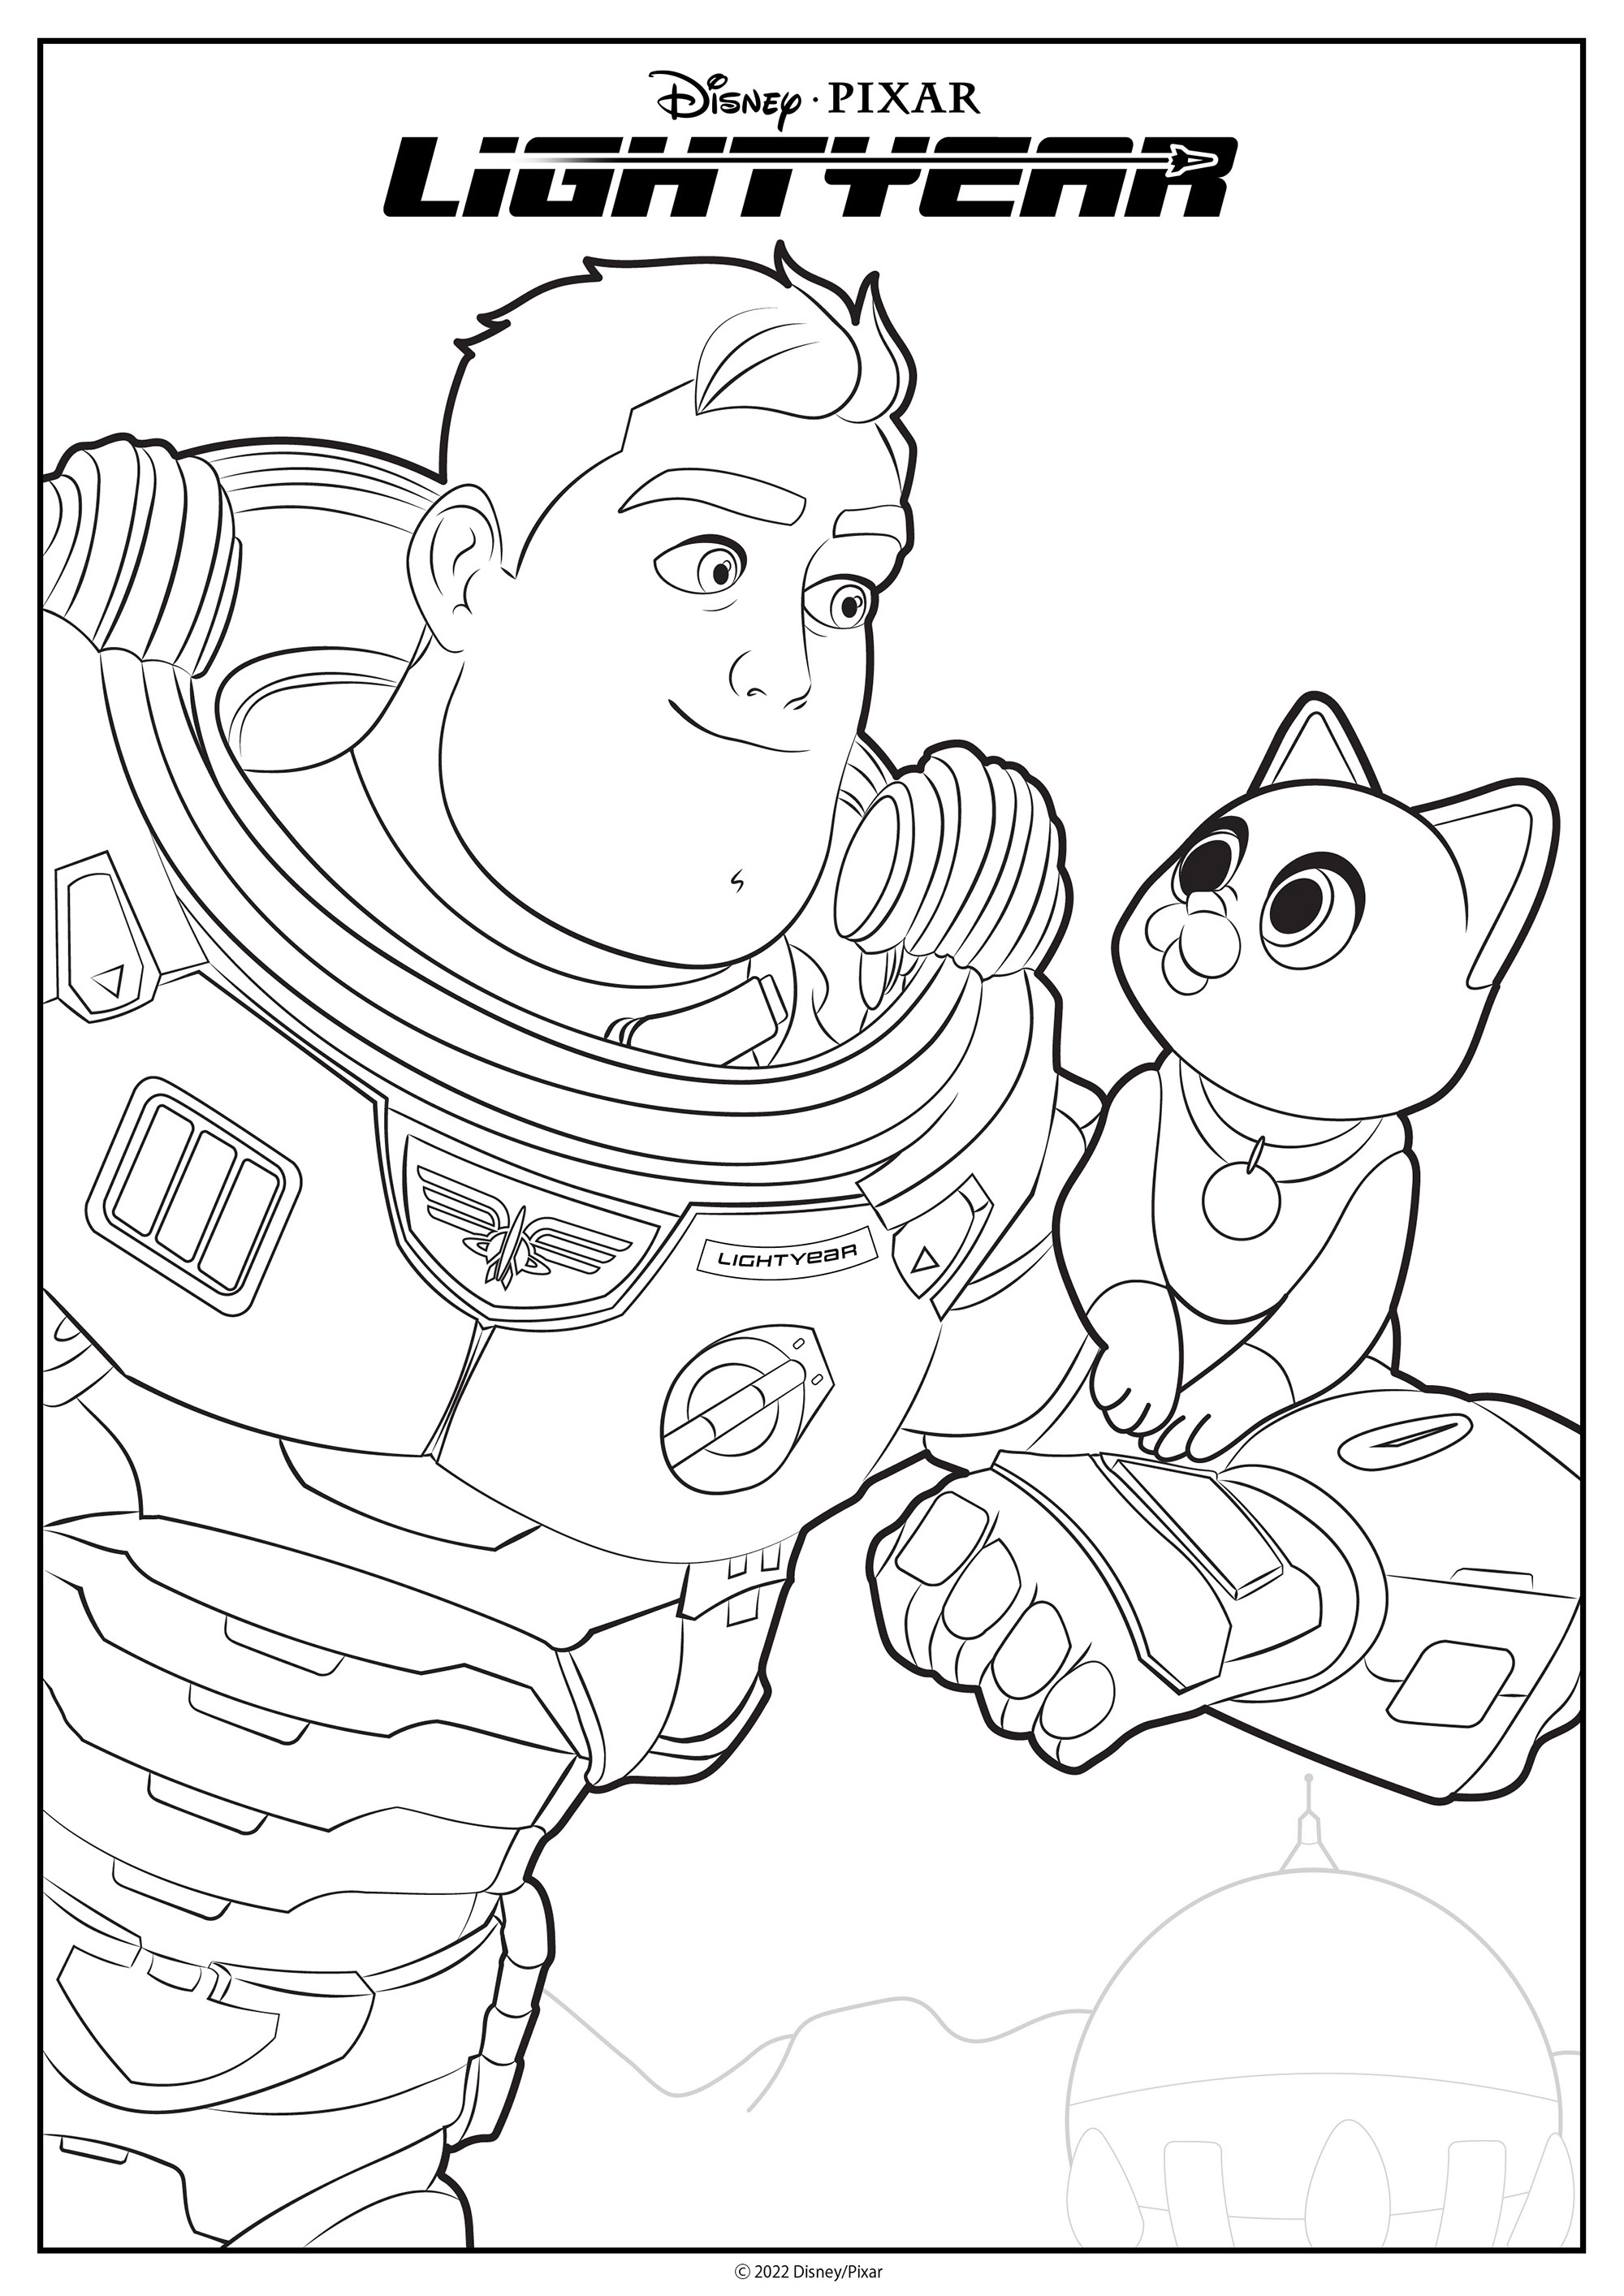 Lightyear coloring page to print and color for free